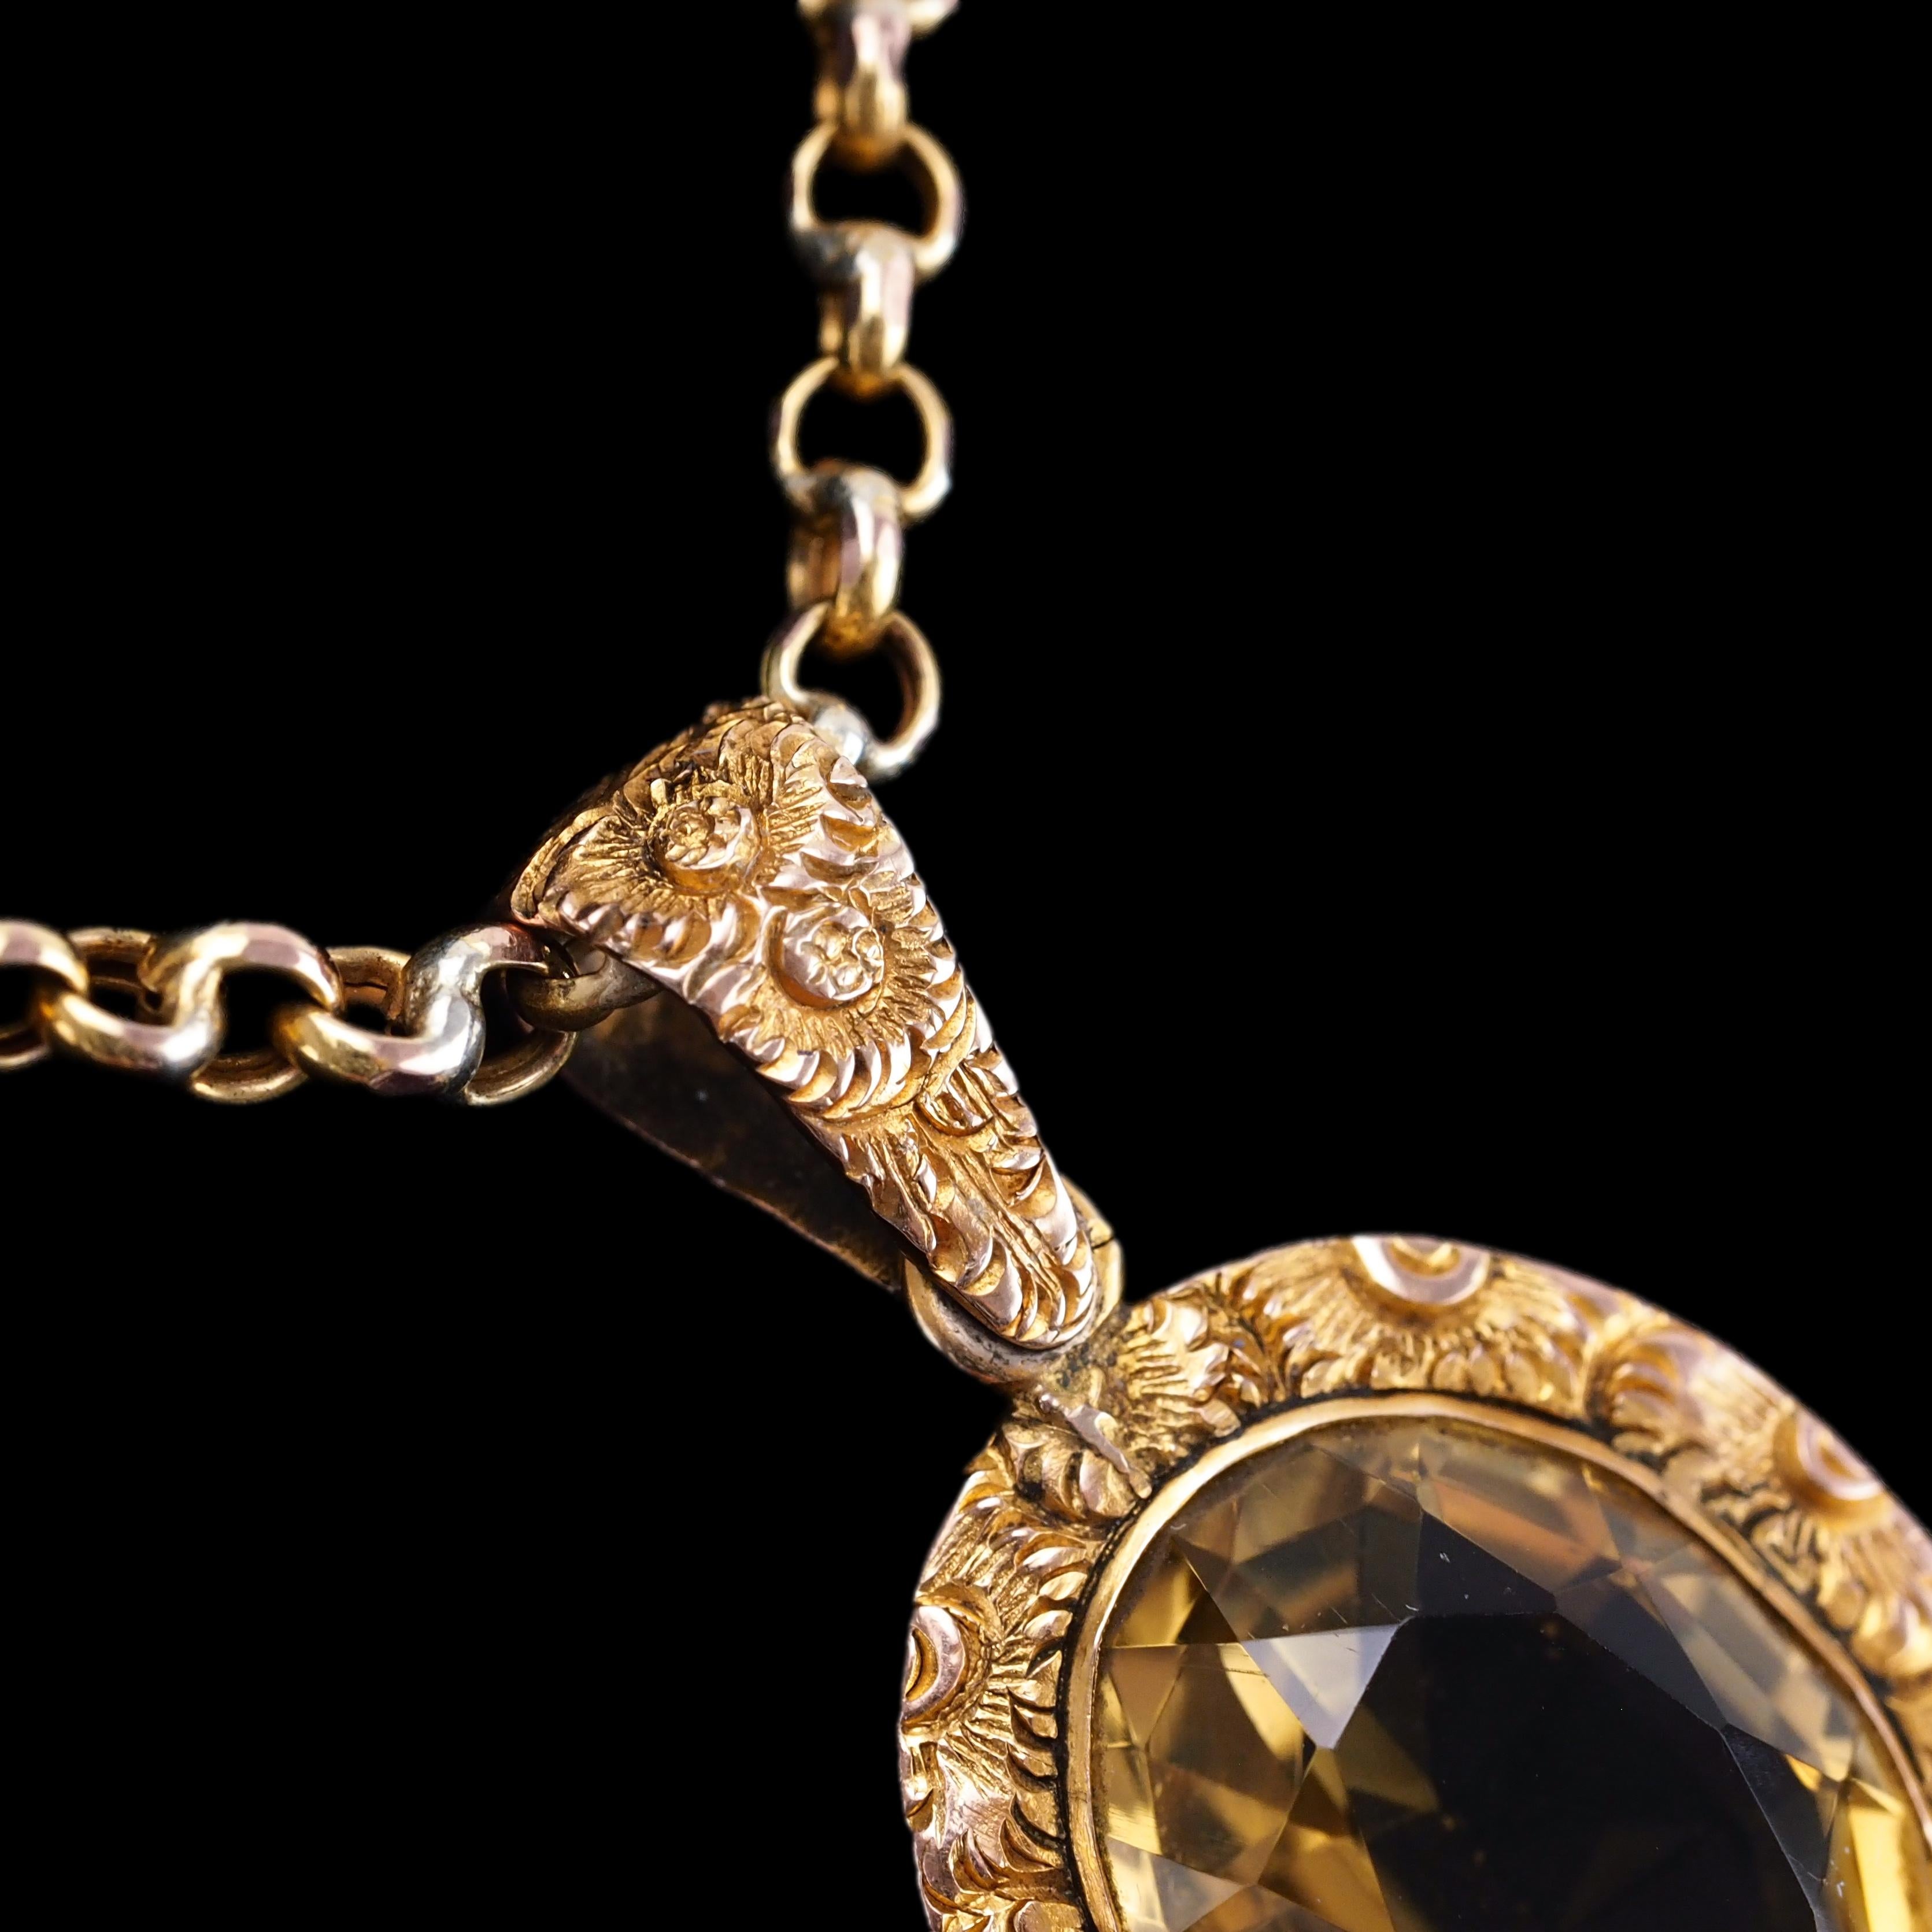 Antique Victorian Citrine Necklace with Chased Floral Pendant 9K Gold c.1850 8